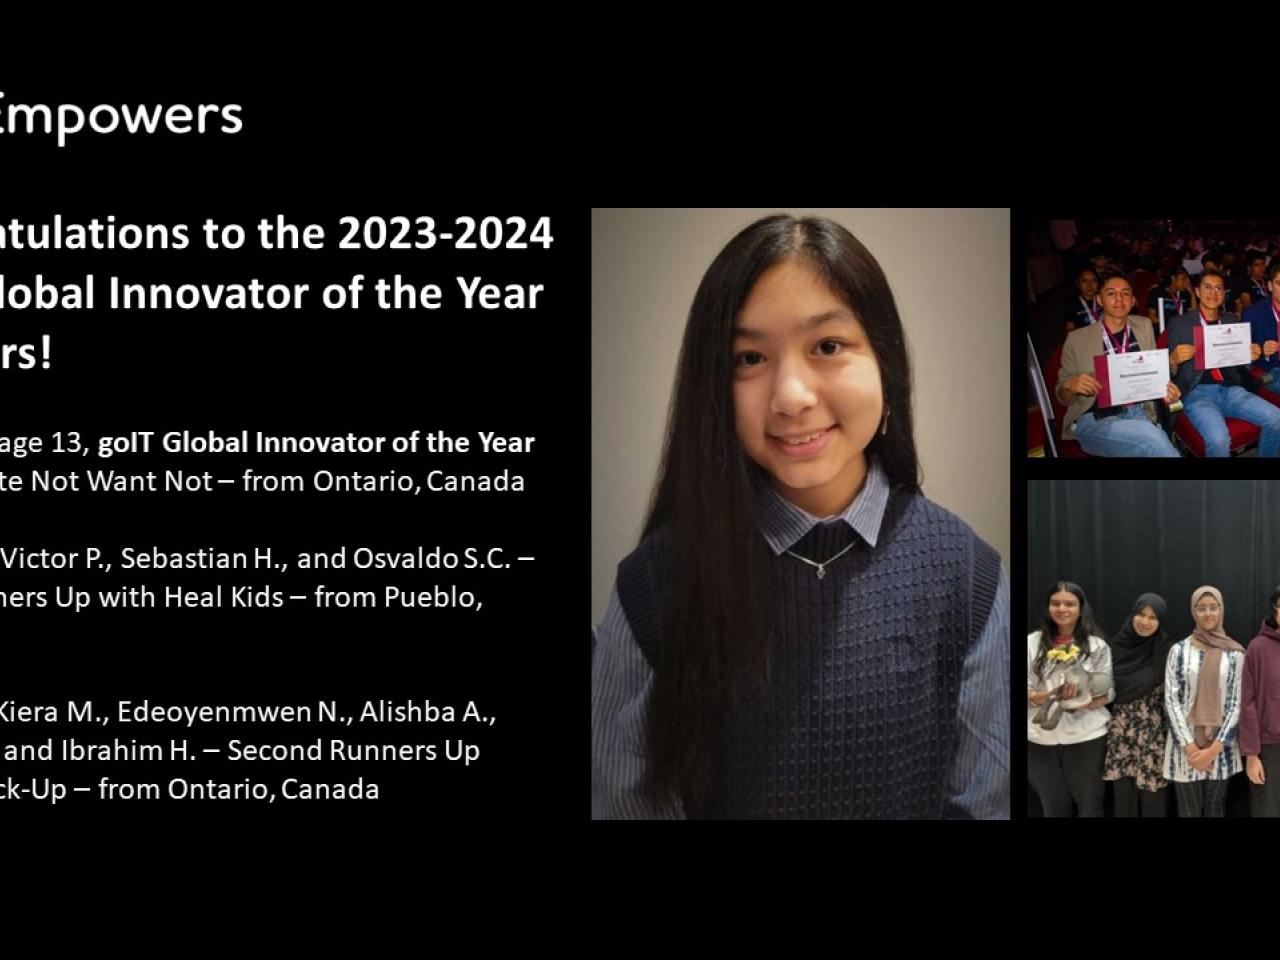 Congratulations to the 2023-2024 goIT Global Innovator of the Year Winners